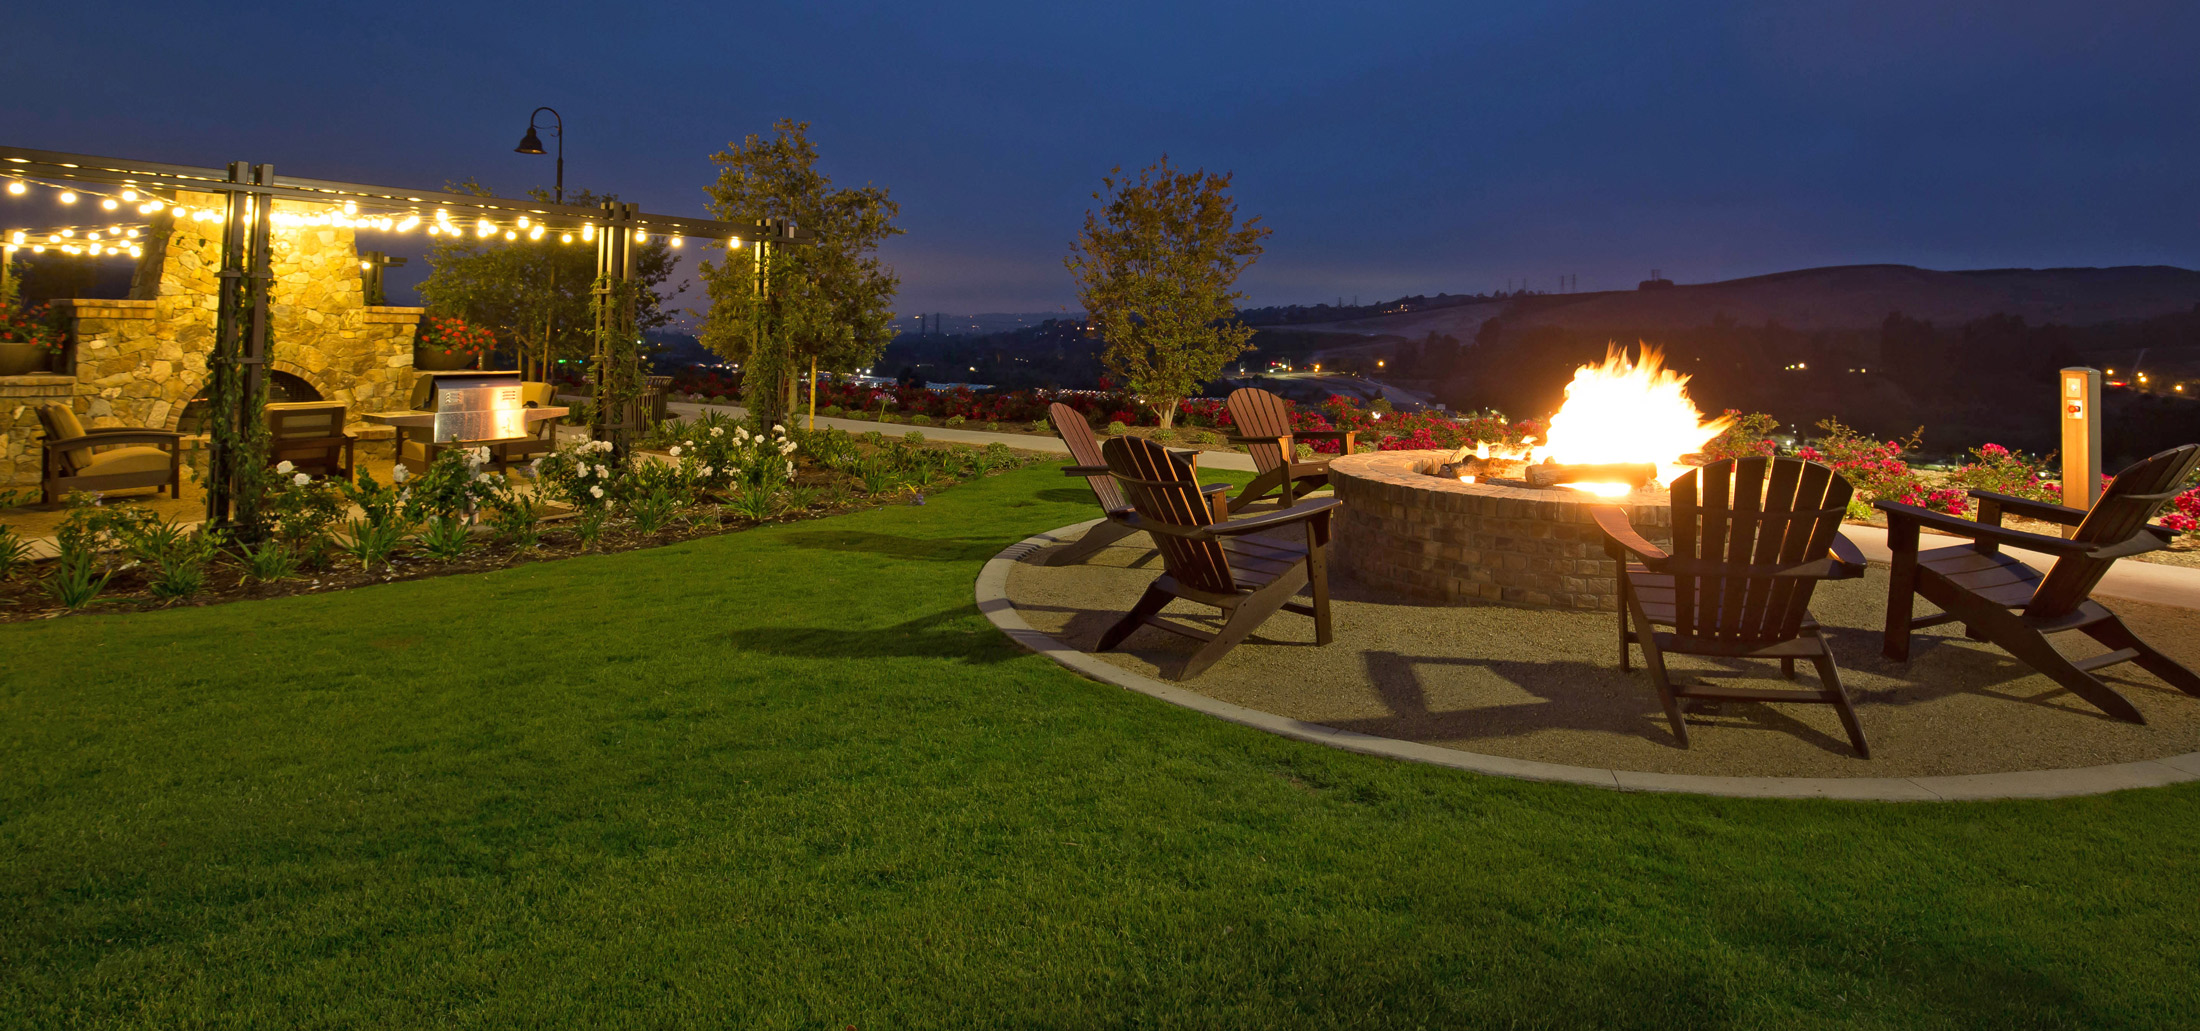 Fire pit lounge area with grilling station